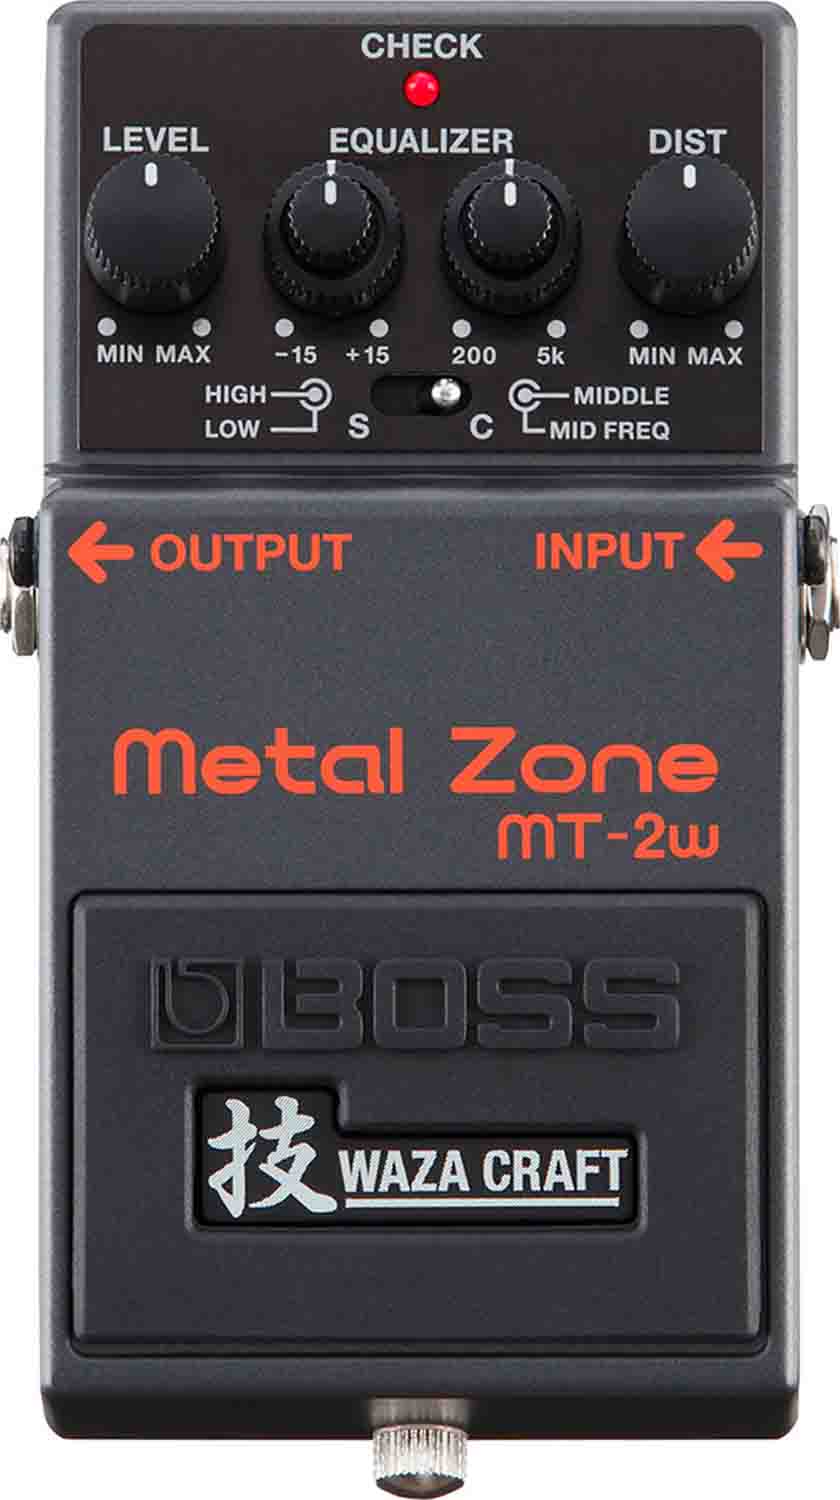 BOSS MT-2W Metal Zone Waza Craft Distortion Pedal for Electric Guitars - Hollywood DJ